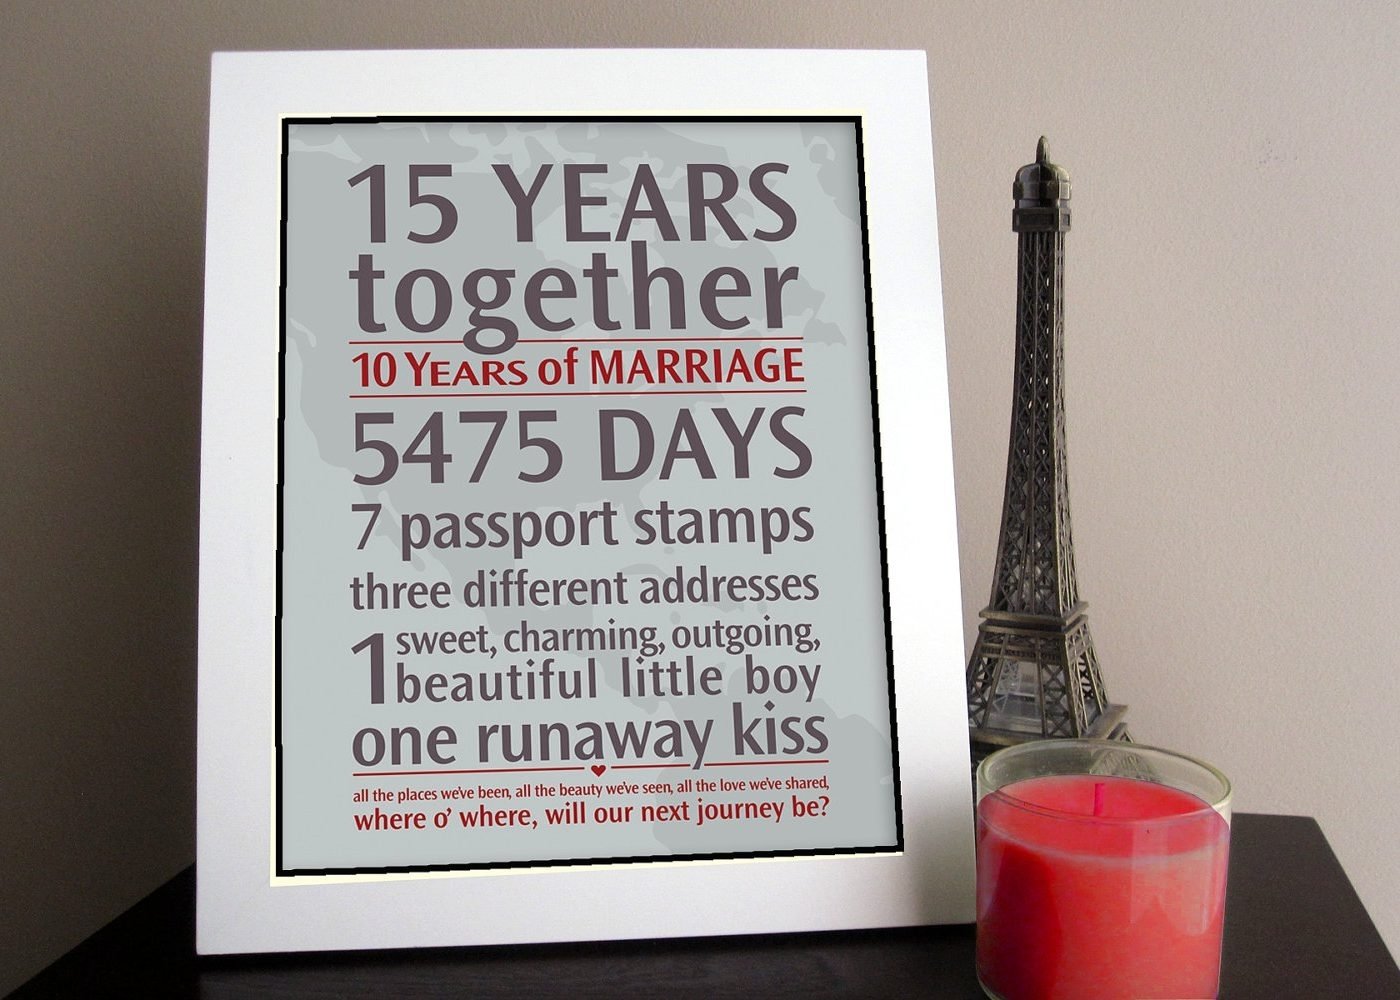 10 Lovable Anniversary Gifts For Parents Ideas striking 50th wedding anniversary gift for parents ideas canada 2022